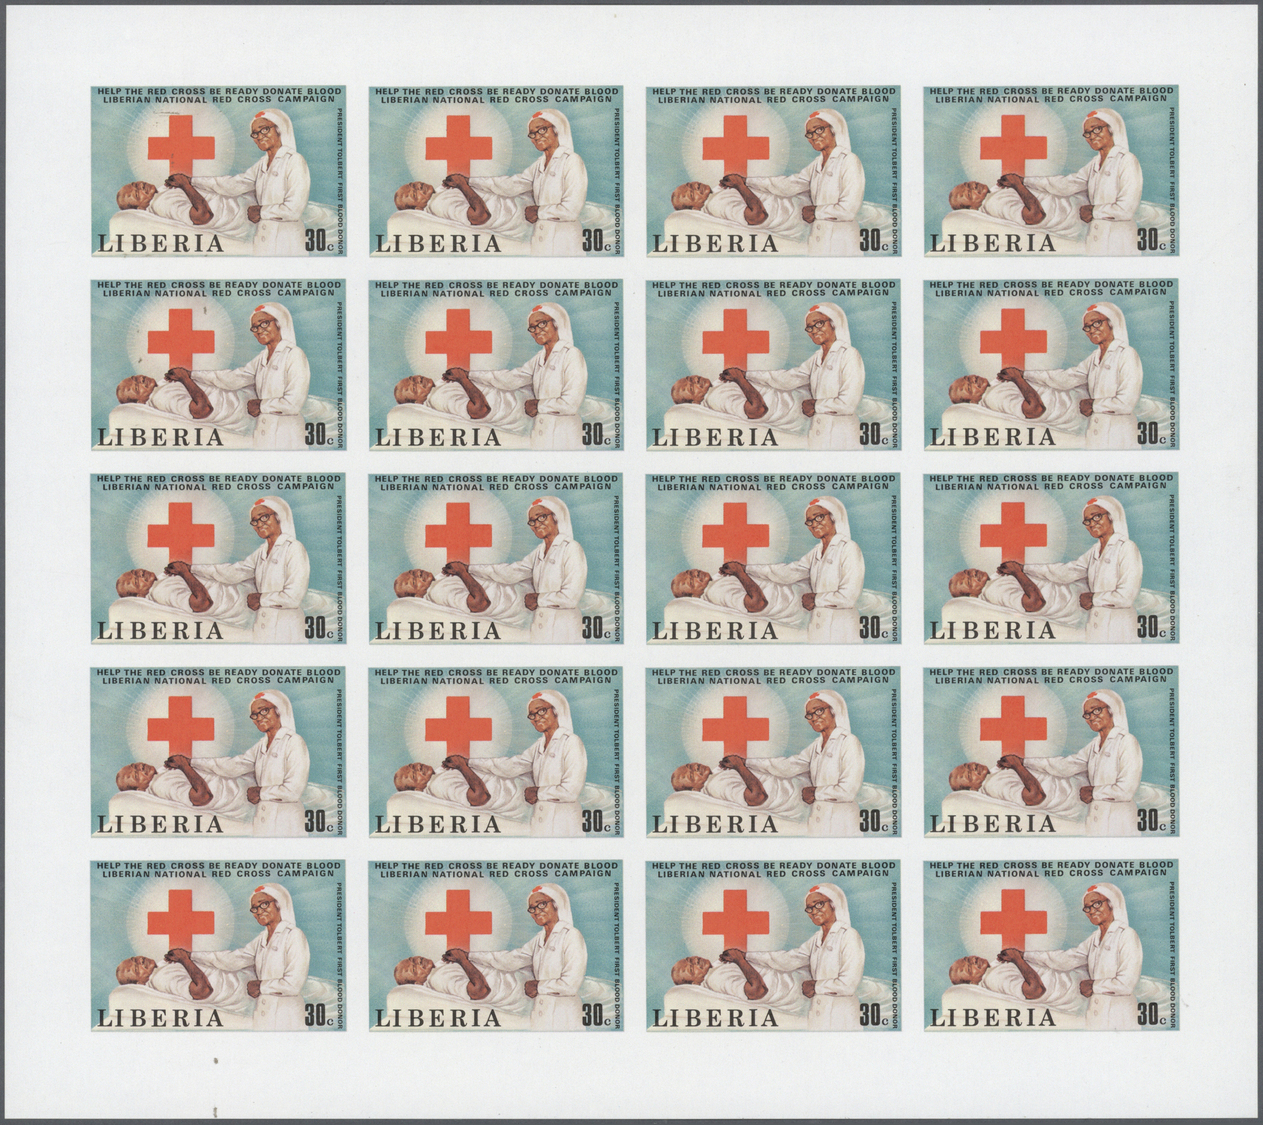 ** Thematik: Rotes Kreuz / Red Cross: 1979, Liberia. Complete Set NATIONAL RED CROSS (2 Values) In Imperforate Miniature - Croix-Rouge